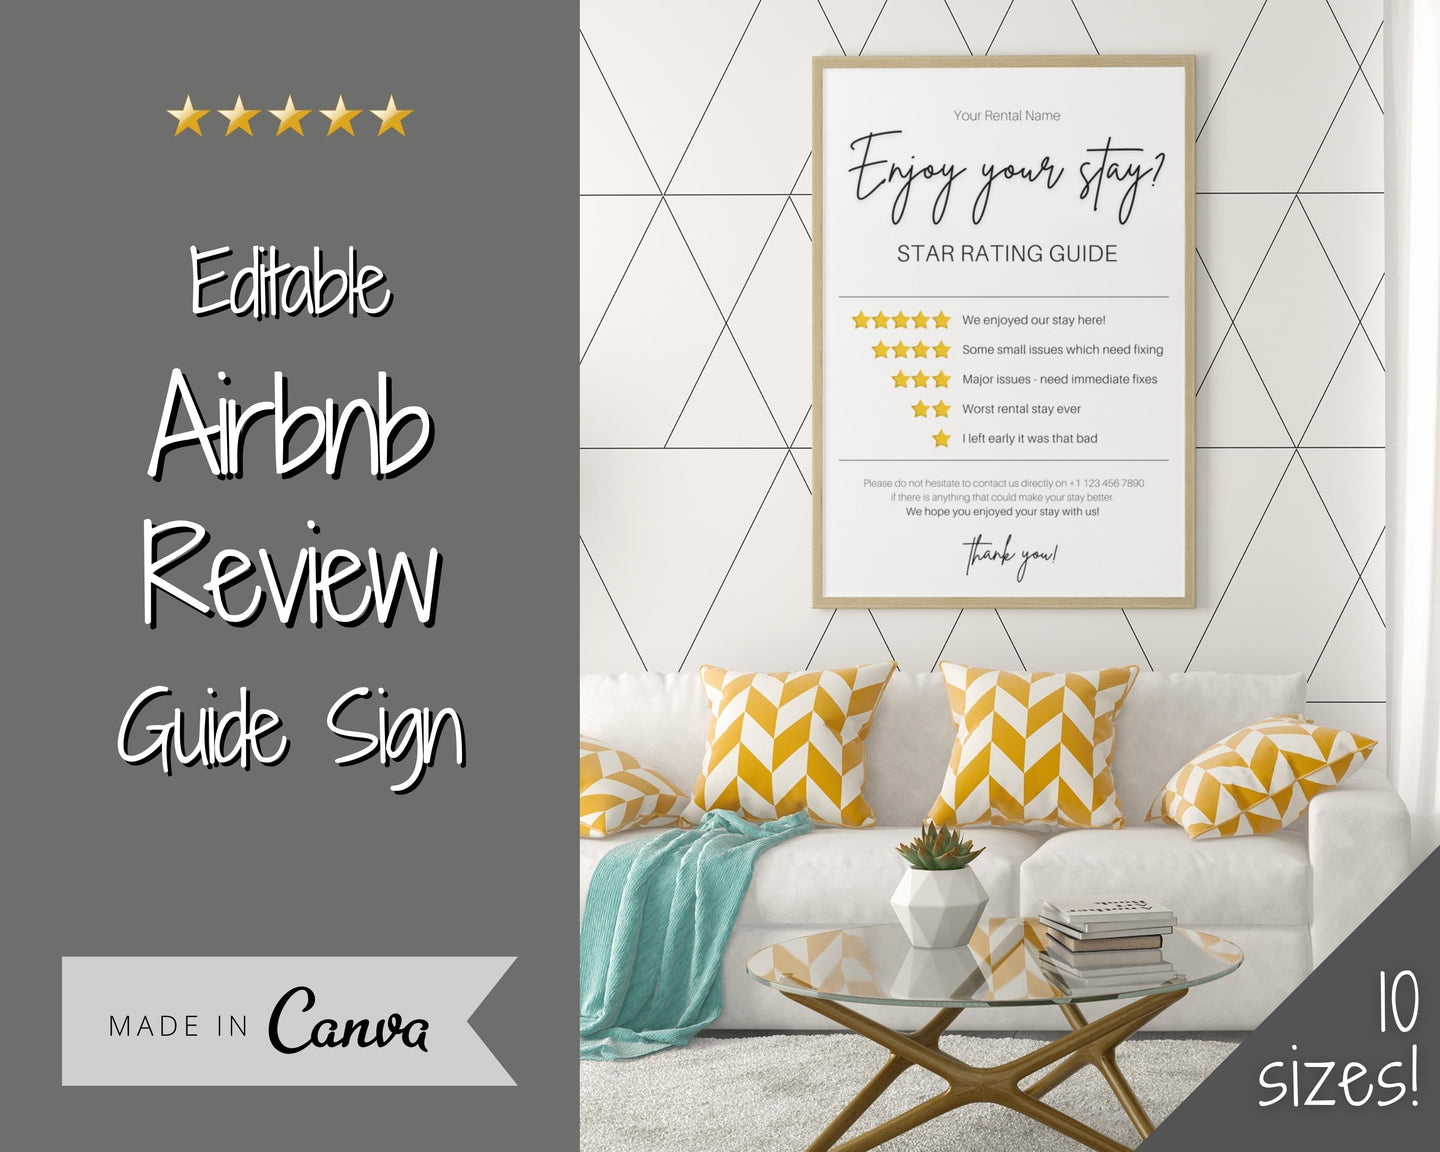 Airbnb RATING Sign, Airbnb Template, 5* Review Airbnb Signage, Check Out, Super Host, Welcome Book, House Rules Checklist, Air bnb, VRBO STR